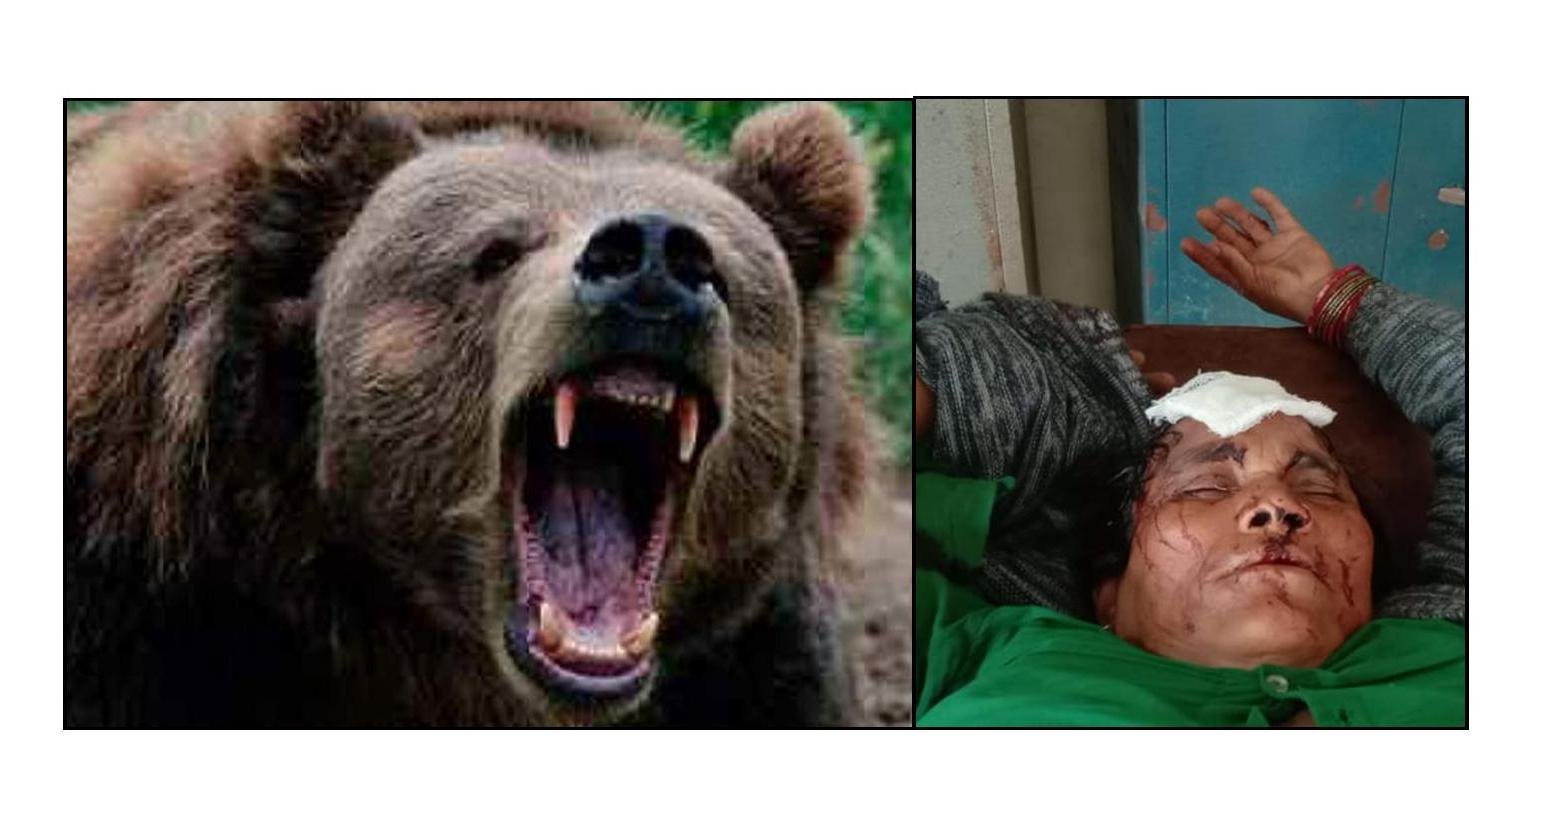 The bear attacked the woman and injured her badly, the woman pleaded for treatment